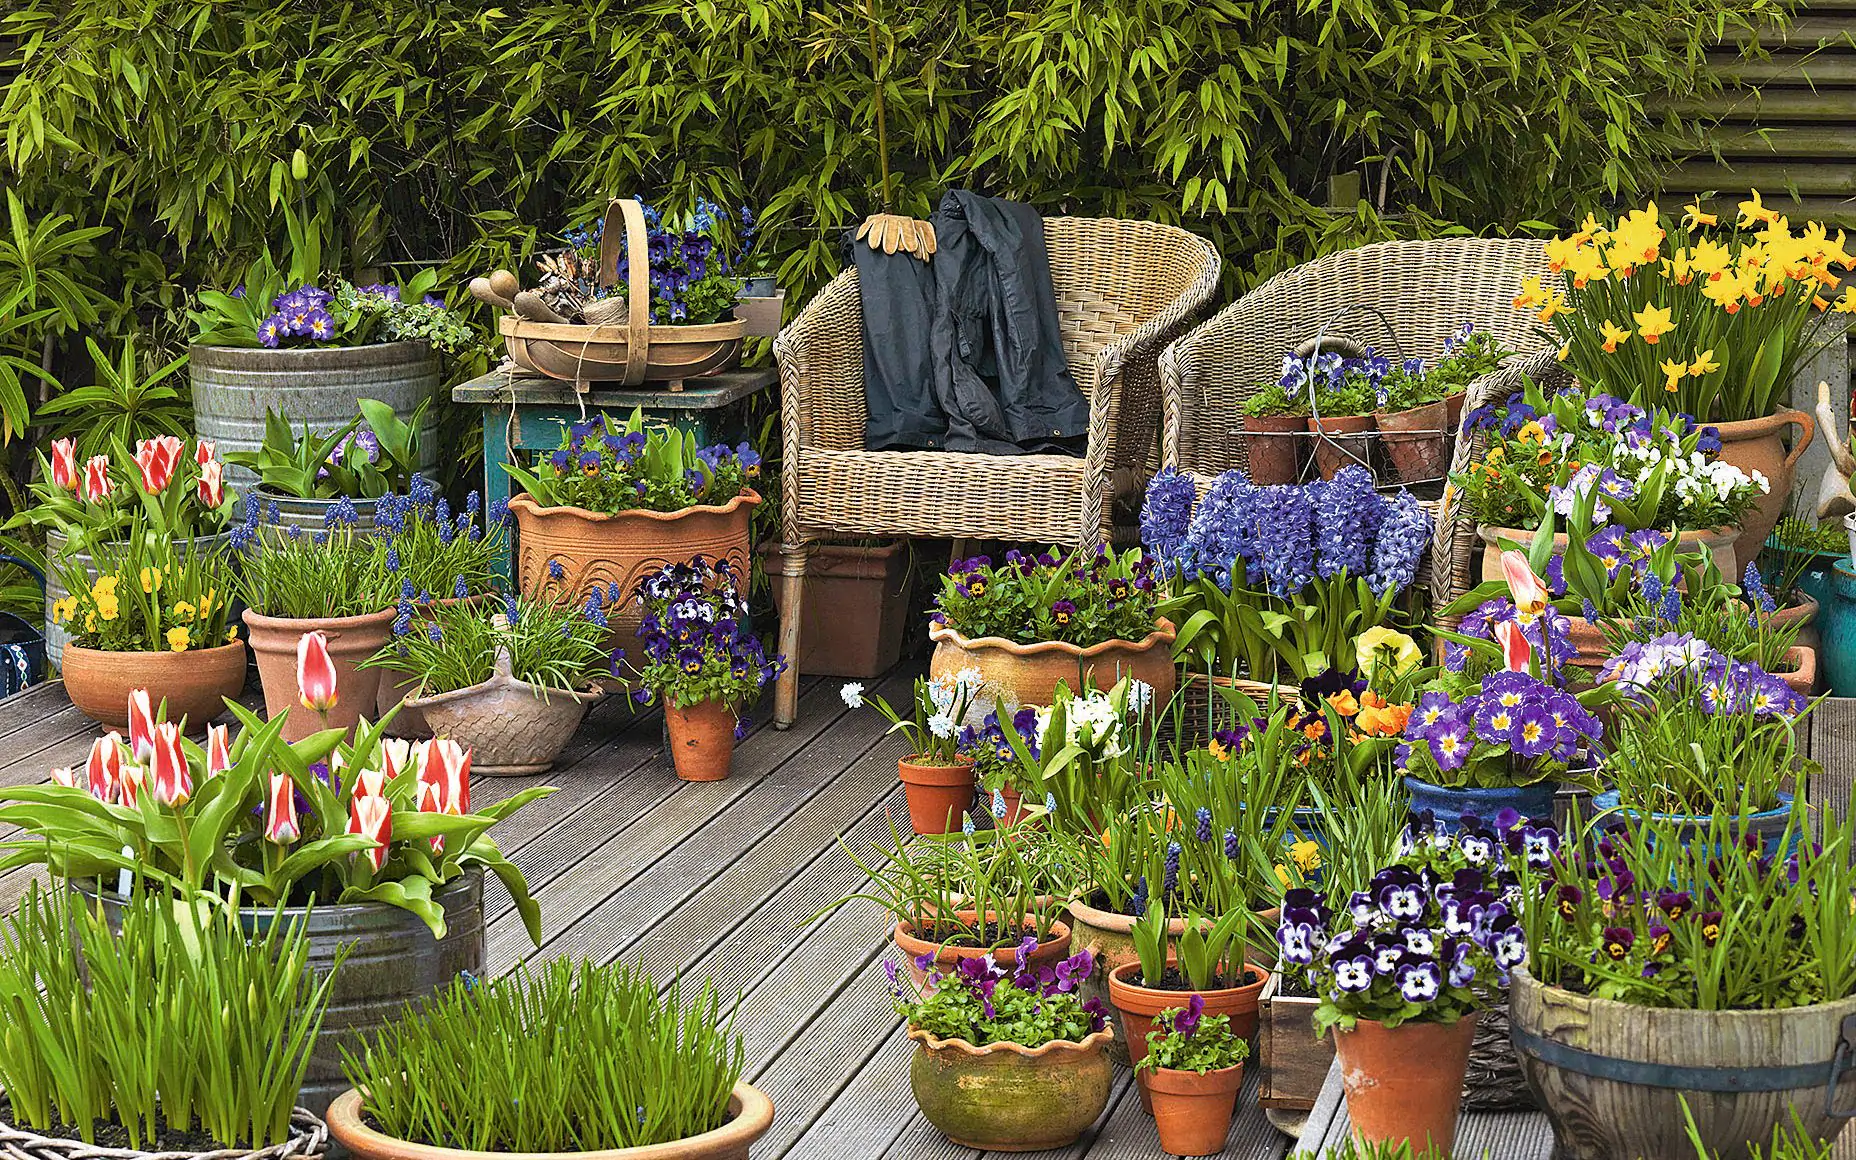 “Potting Paradise: 10 Inspired Garden Designs for Containers”